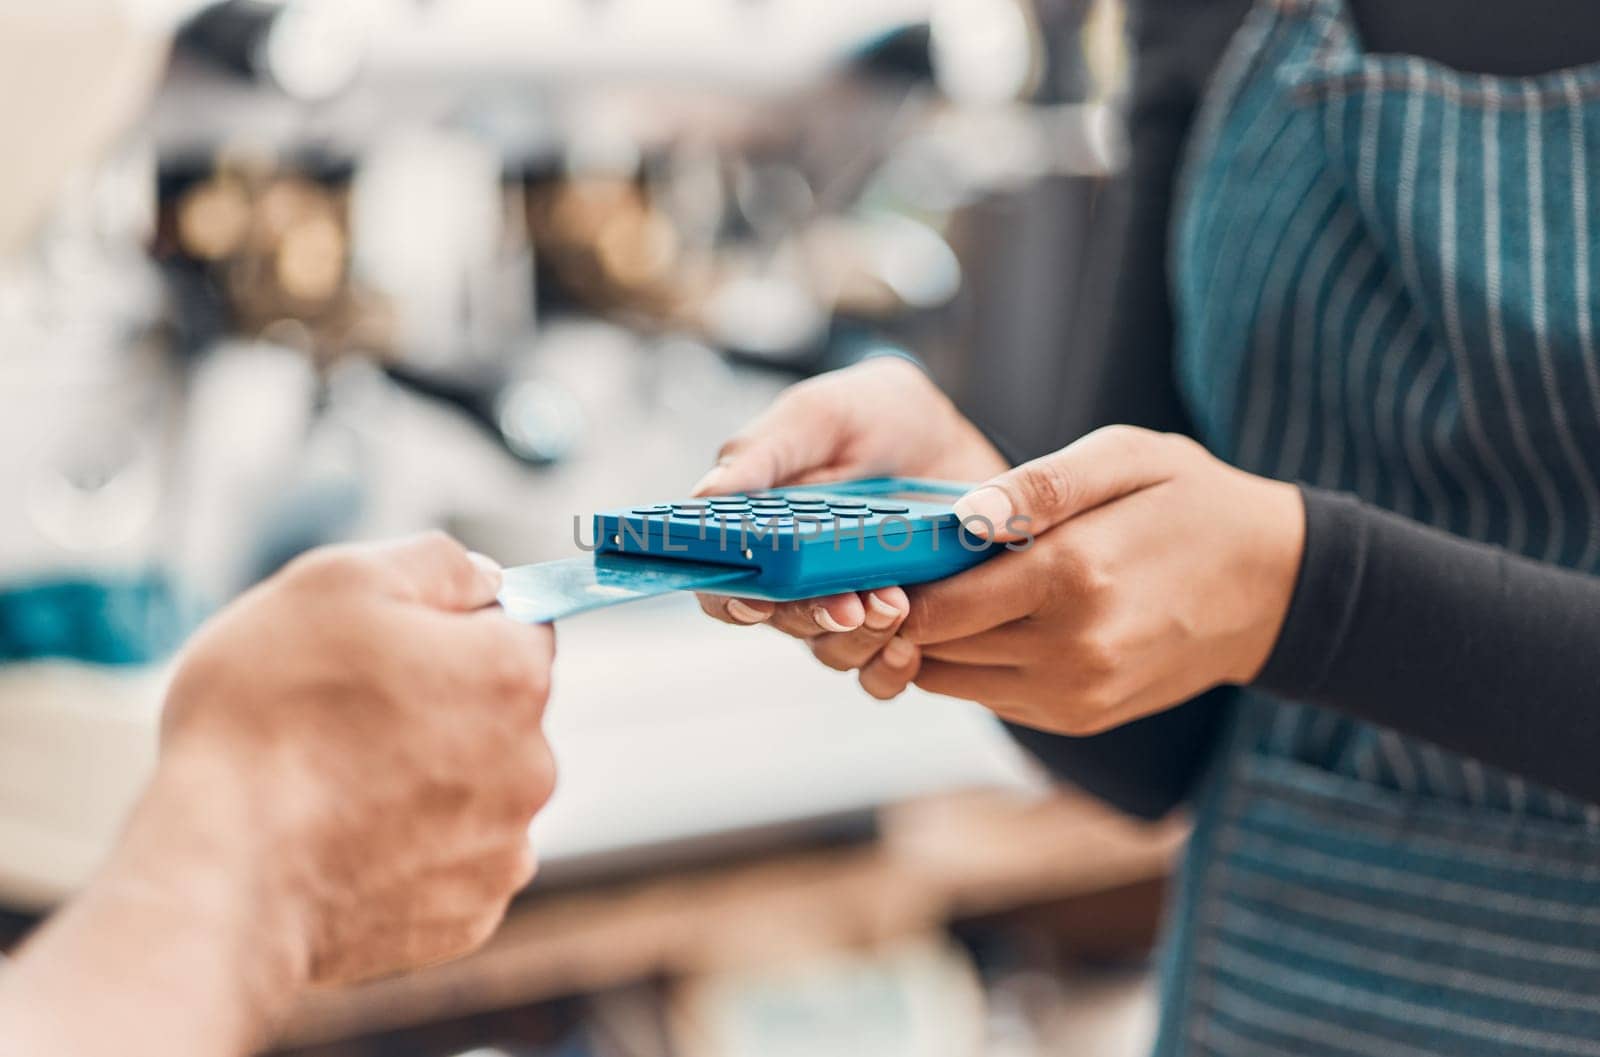 Credit card, machine and hands for payment in a coffee shop for shopping, bills or sale with technology. Contactless paying, electronic transaction or closeup of cafe customer at cashier for checkout.